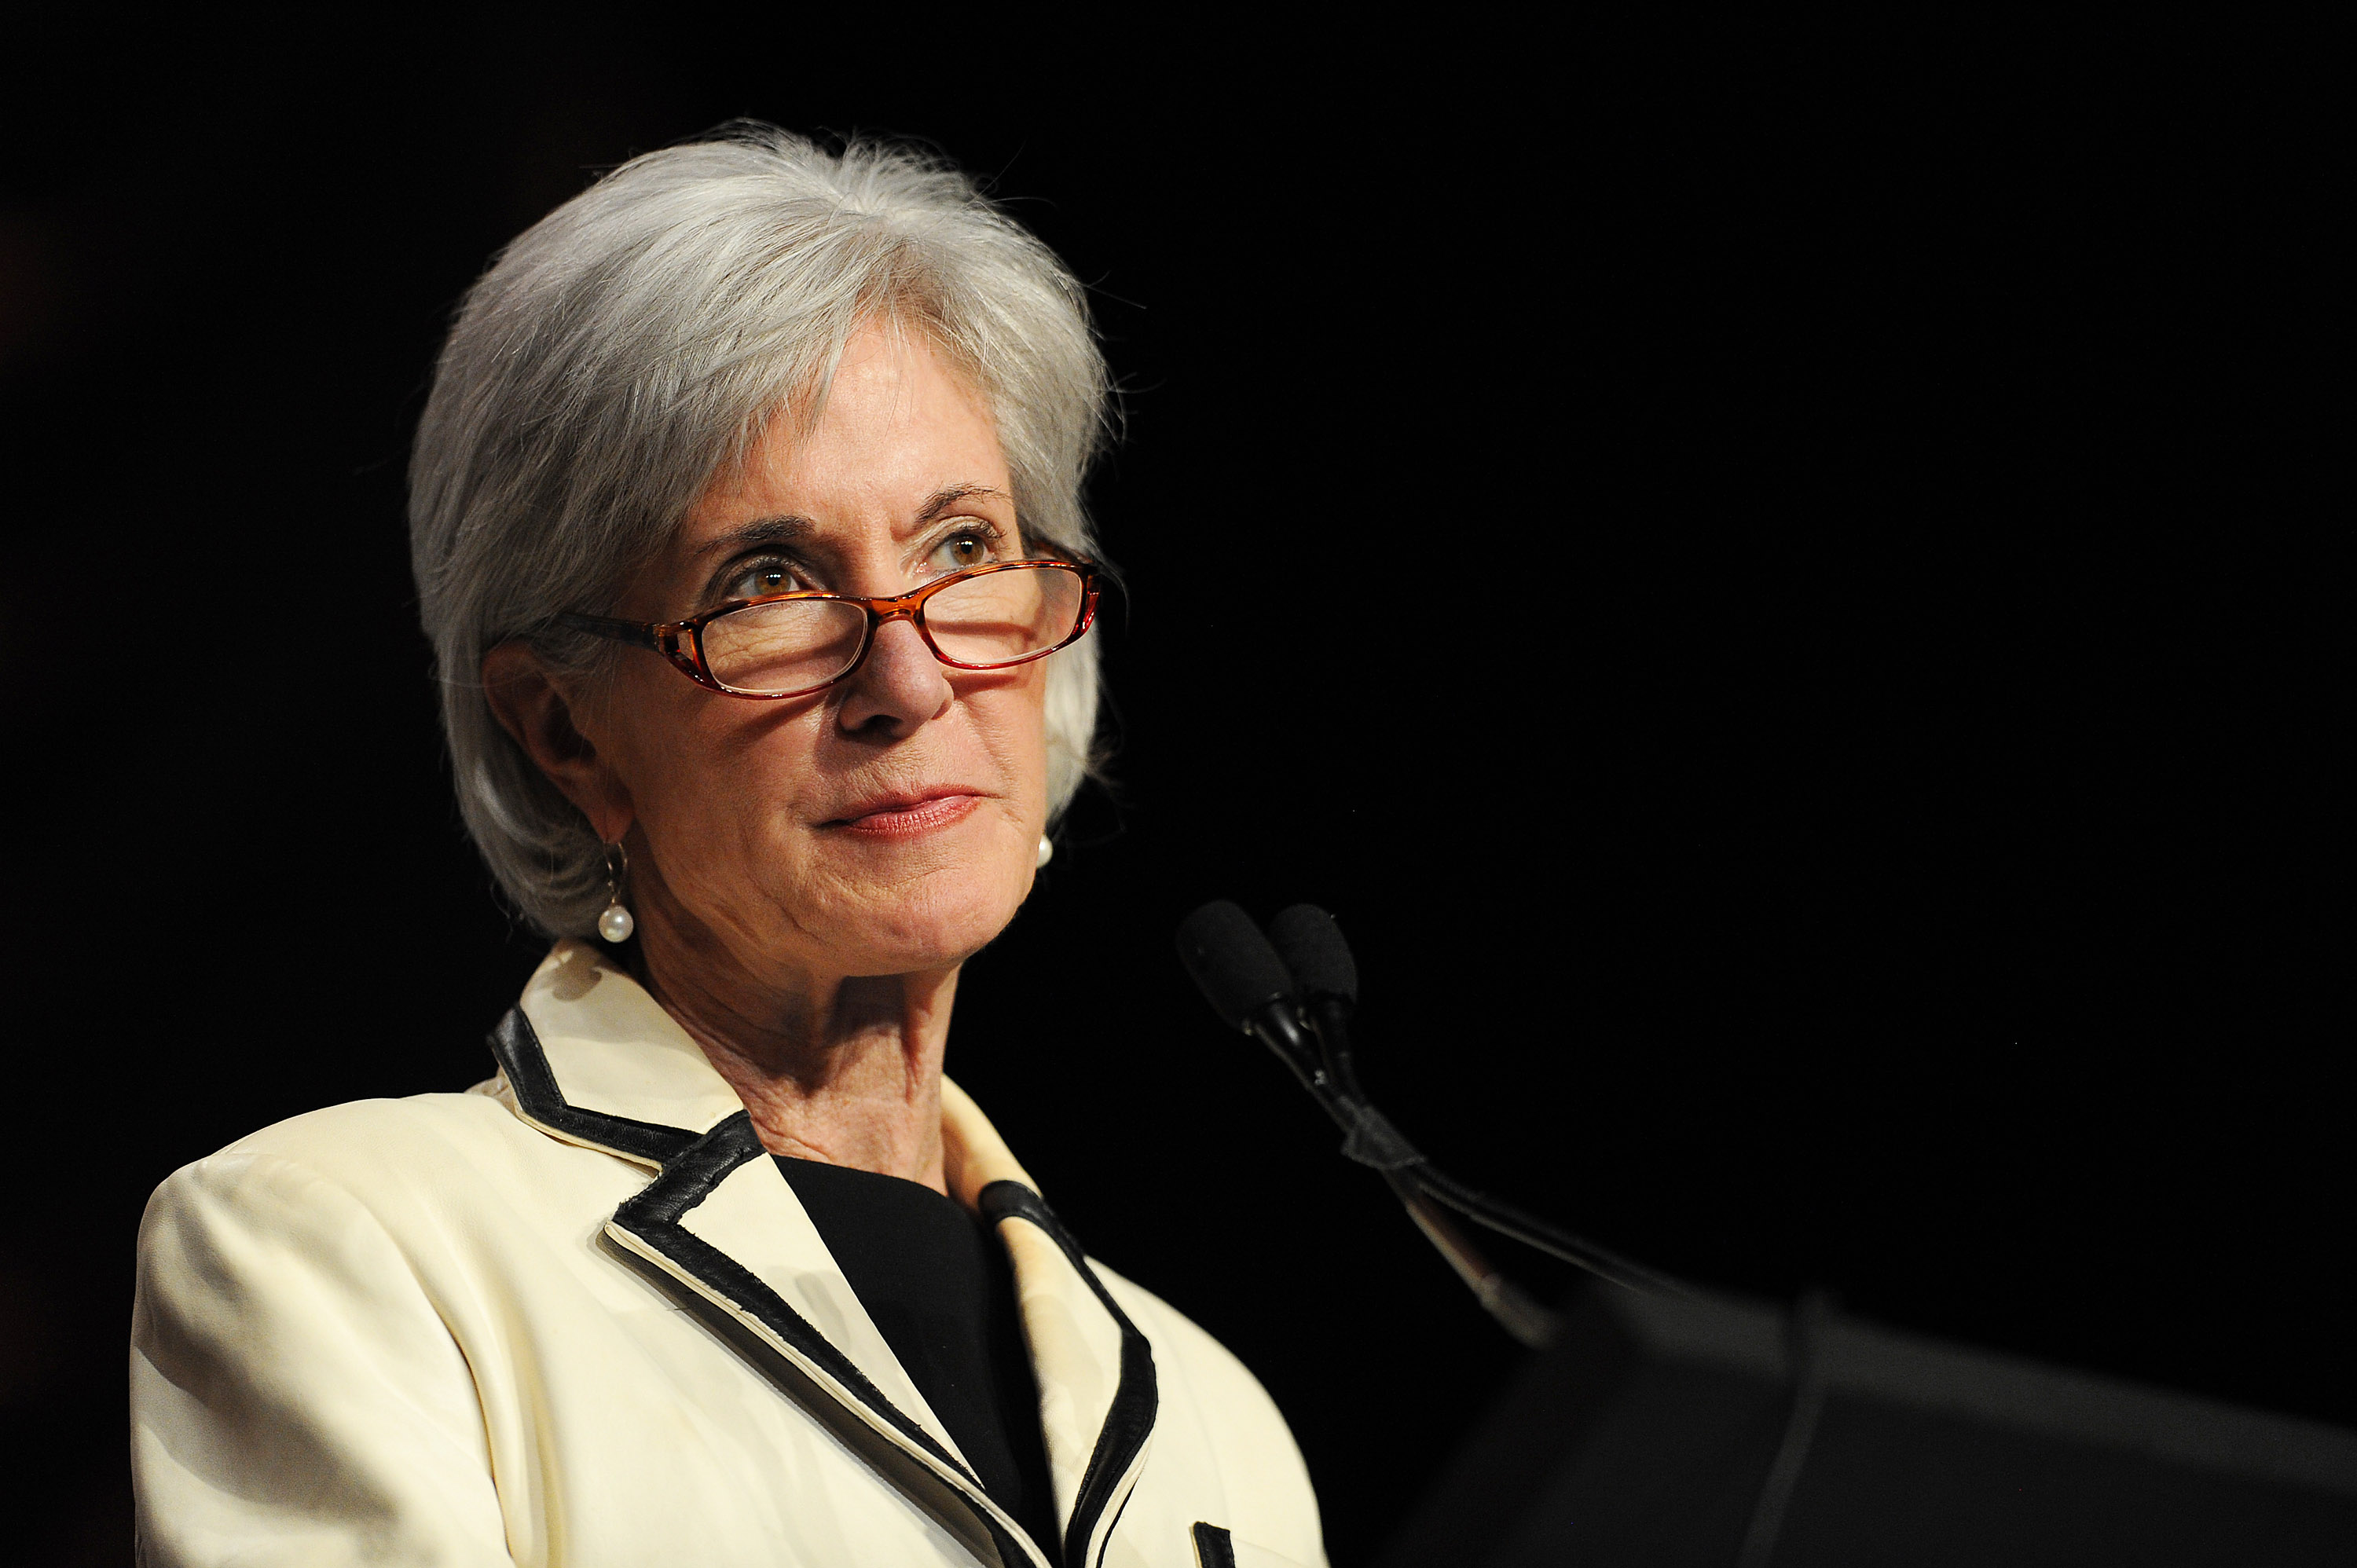 Then Health and Human Services Secretary Kathleen Sebelius addresses a crowd at the National Council for Behavioral Health's annual conference in National Harbor, Maryland, on May 6, 2014.